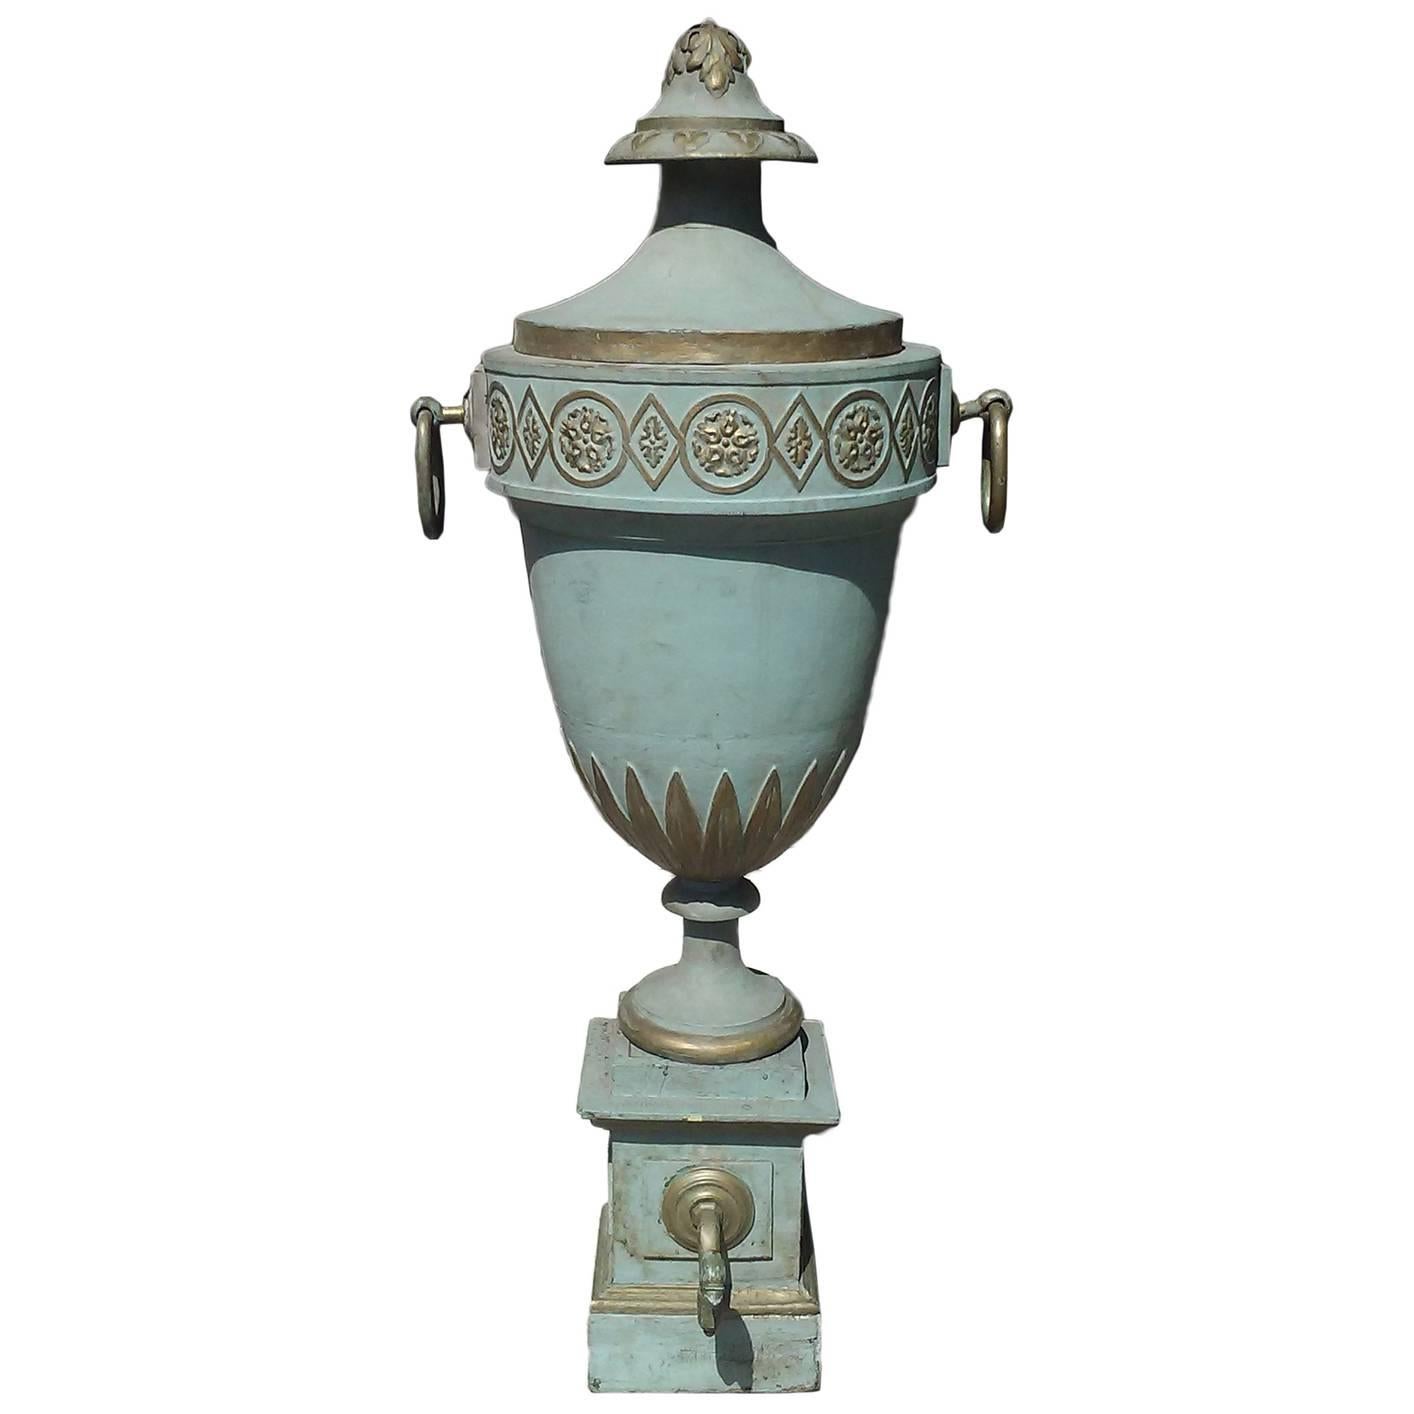 Jumbo 19th Century Tole Urn with Old Paint